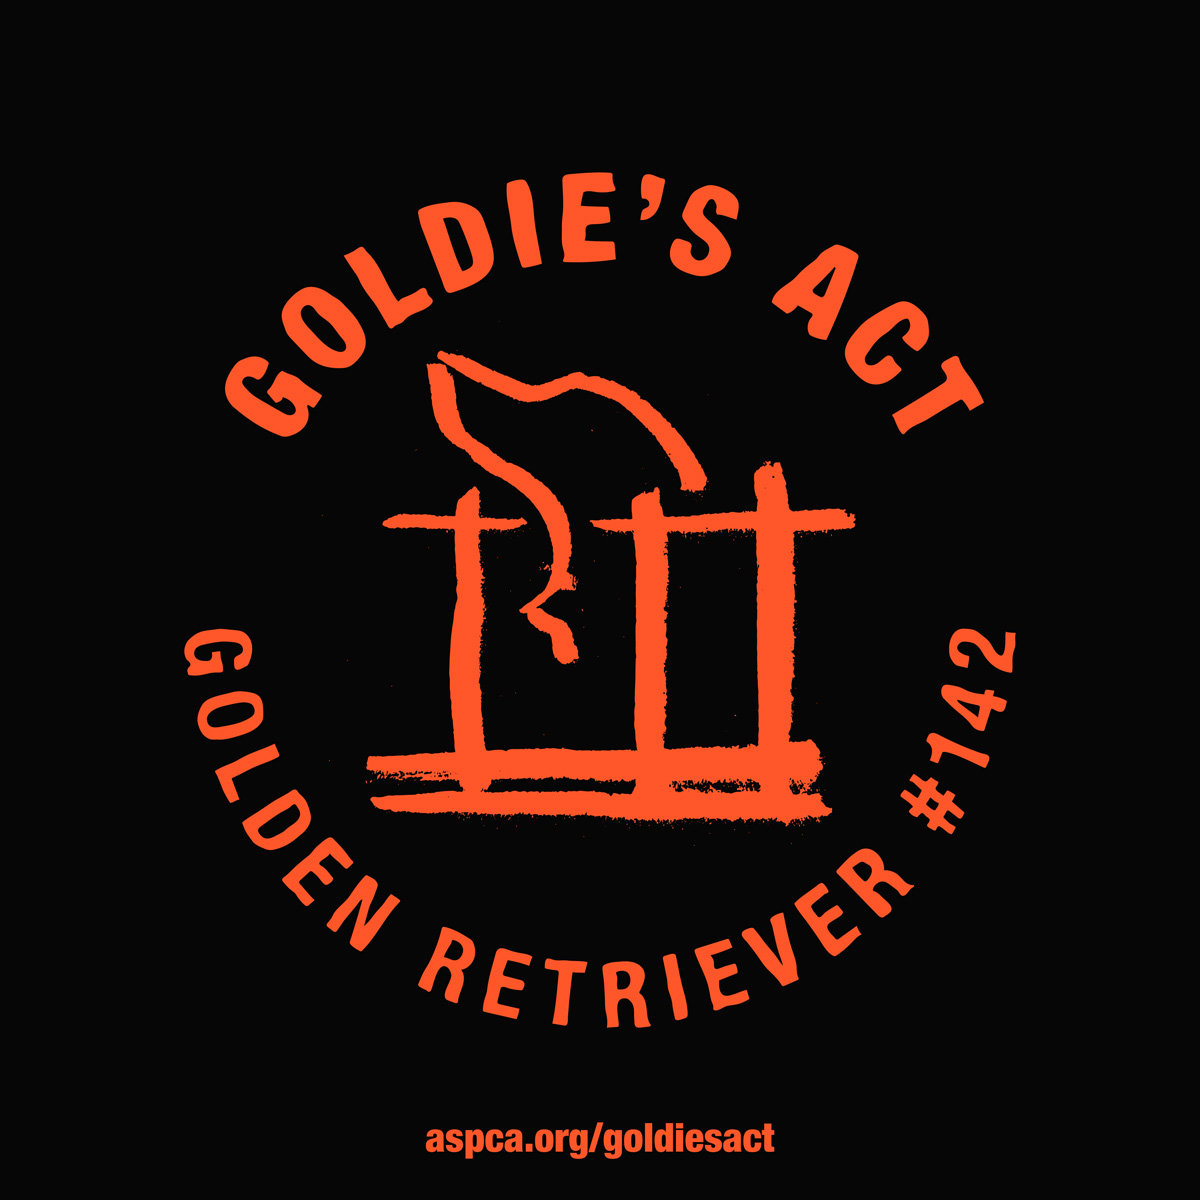 Goldie's Act Illustration of a dog's head reaching over bars: GOLDIE'S ACT GOLDEN RETRIEVER #142 - aspca.org/GoldiesAct